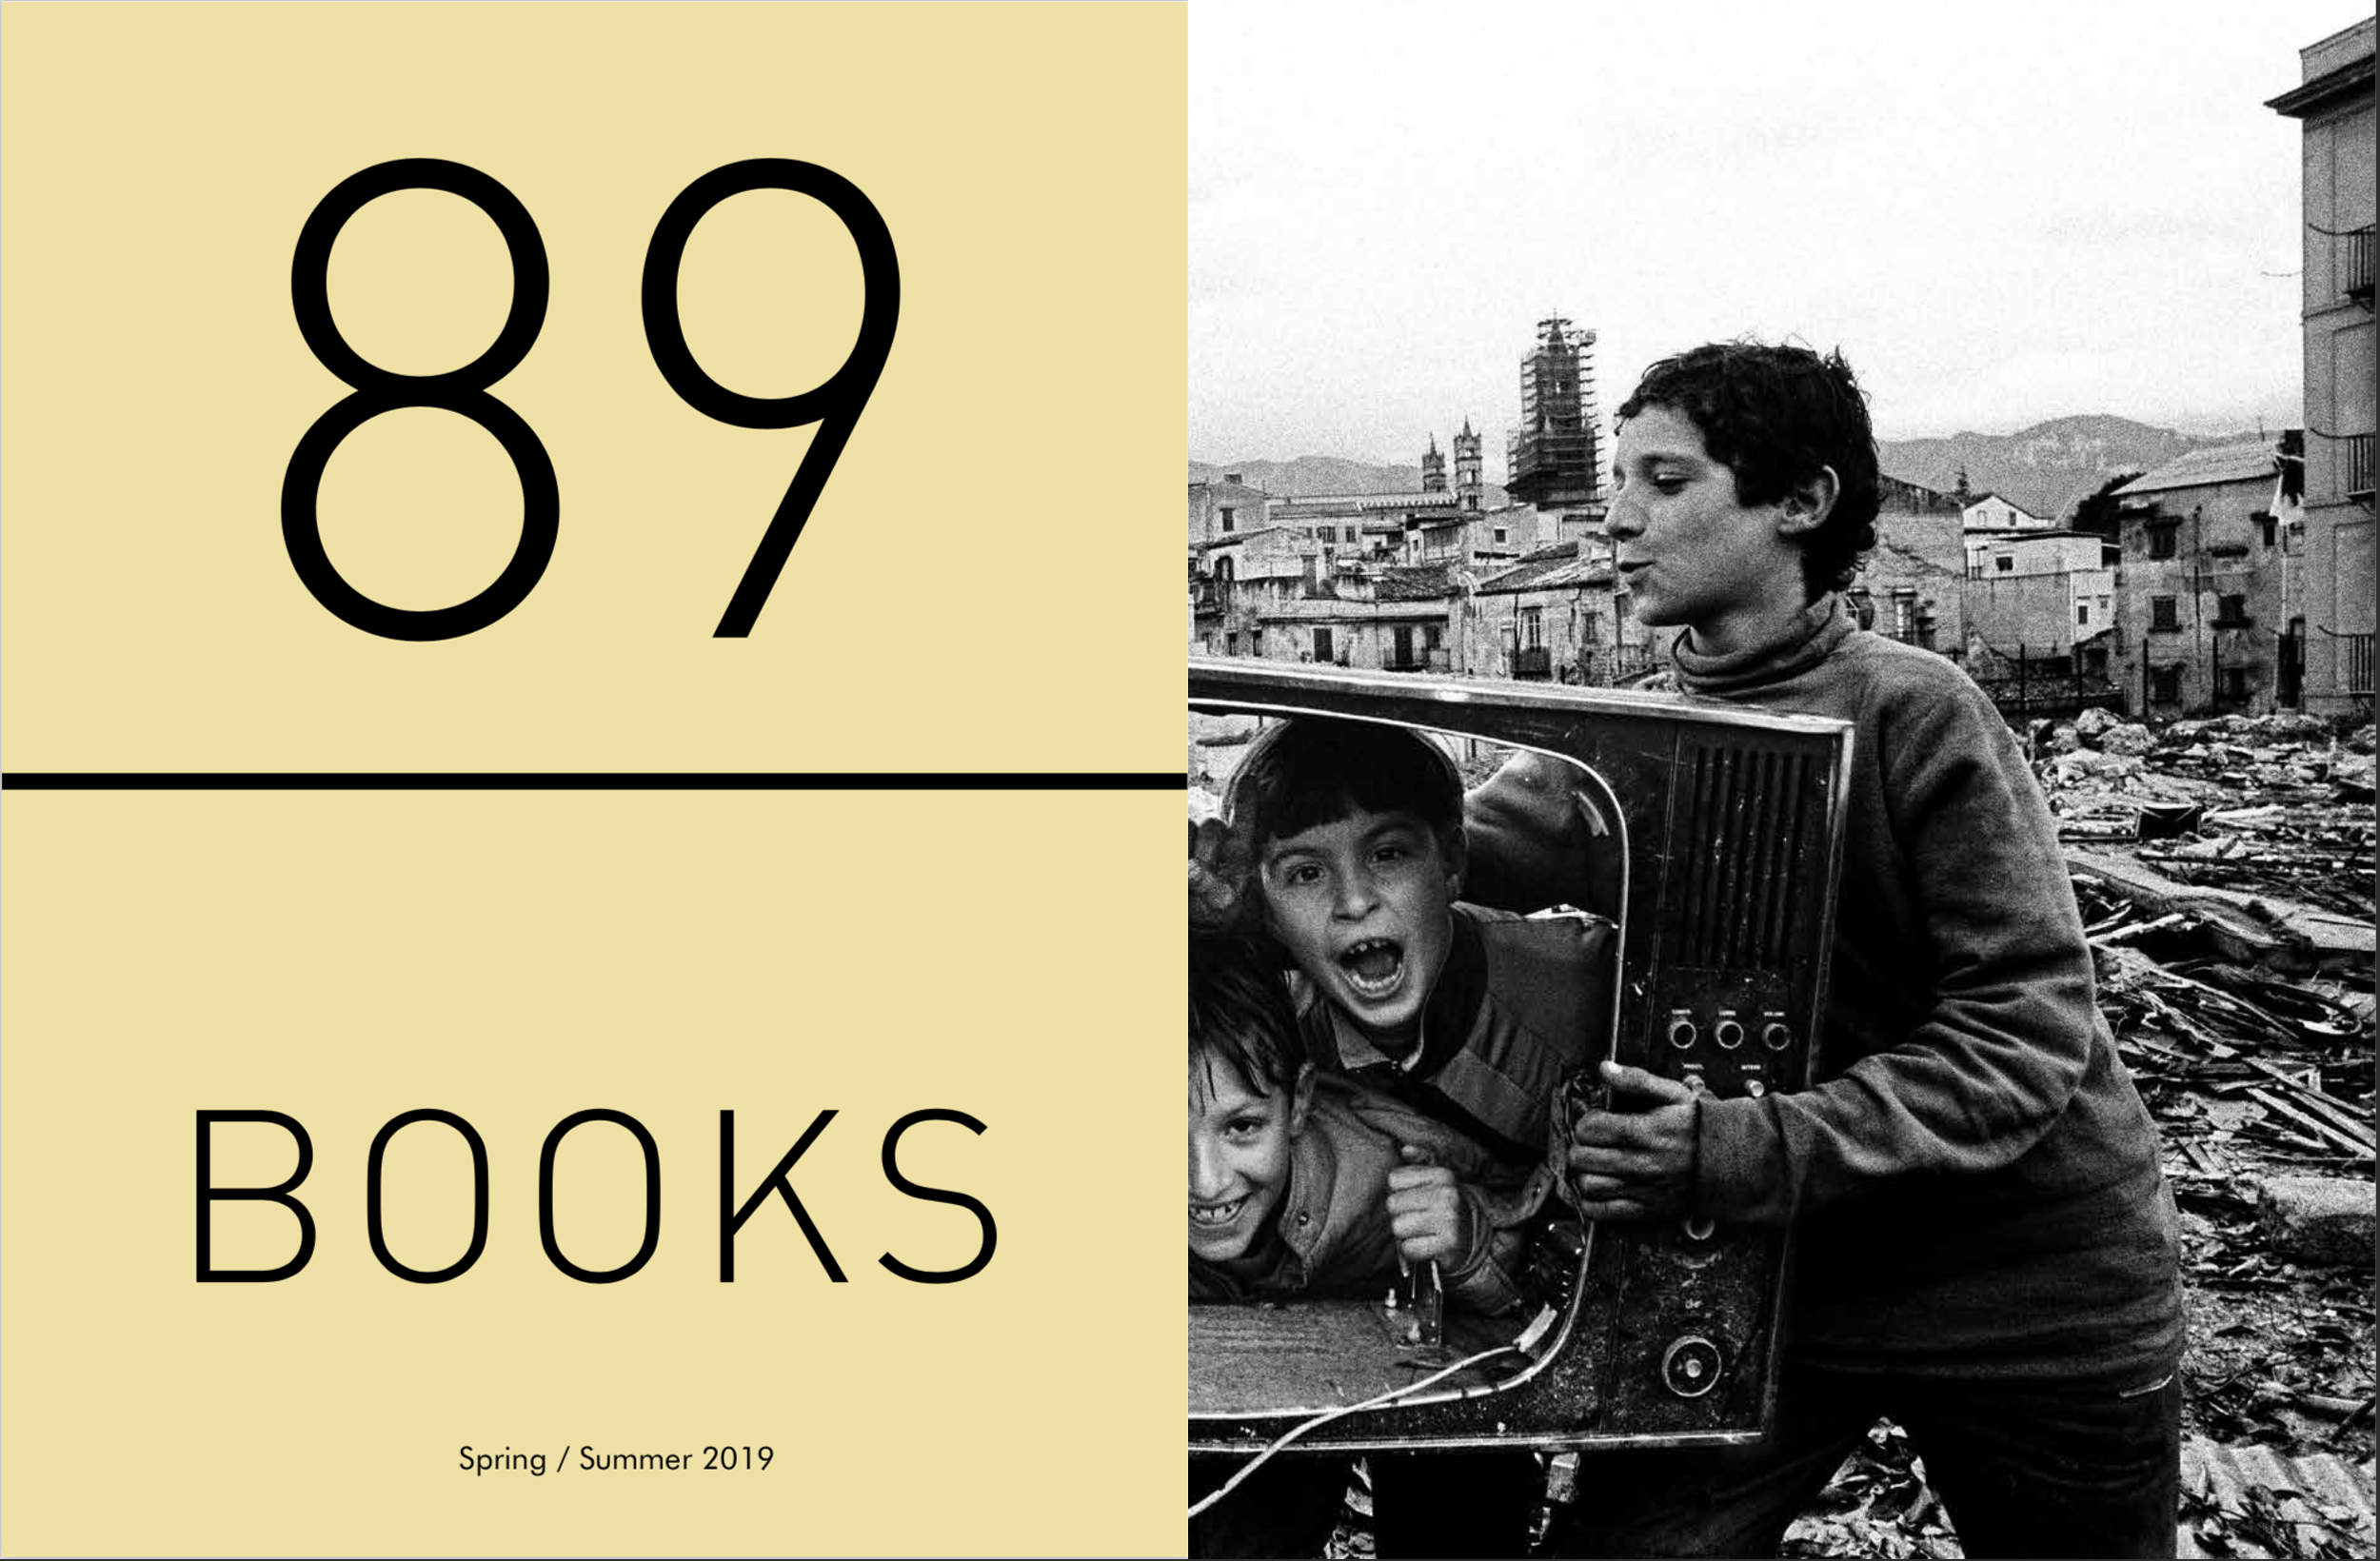 89books Spring / Summer 2019 catalogue is out and available for download